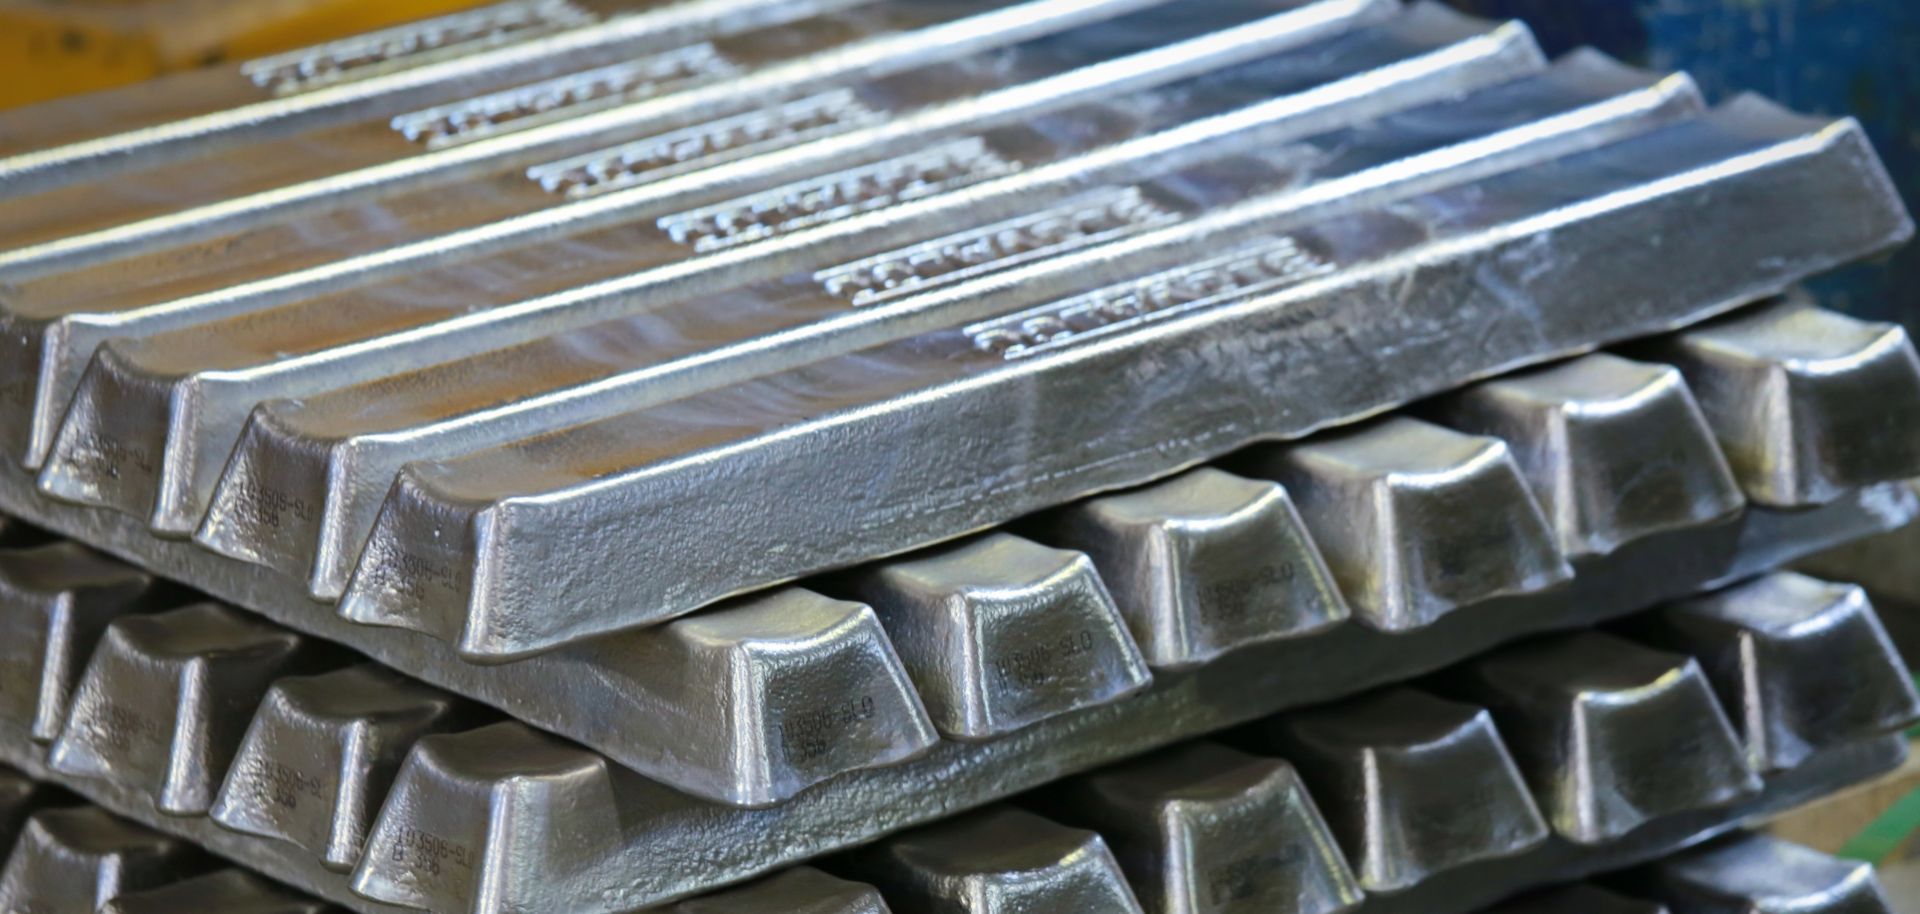 This photograph shows bars of aluminum.